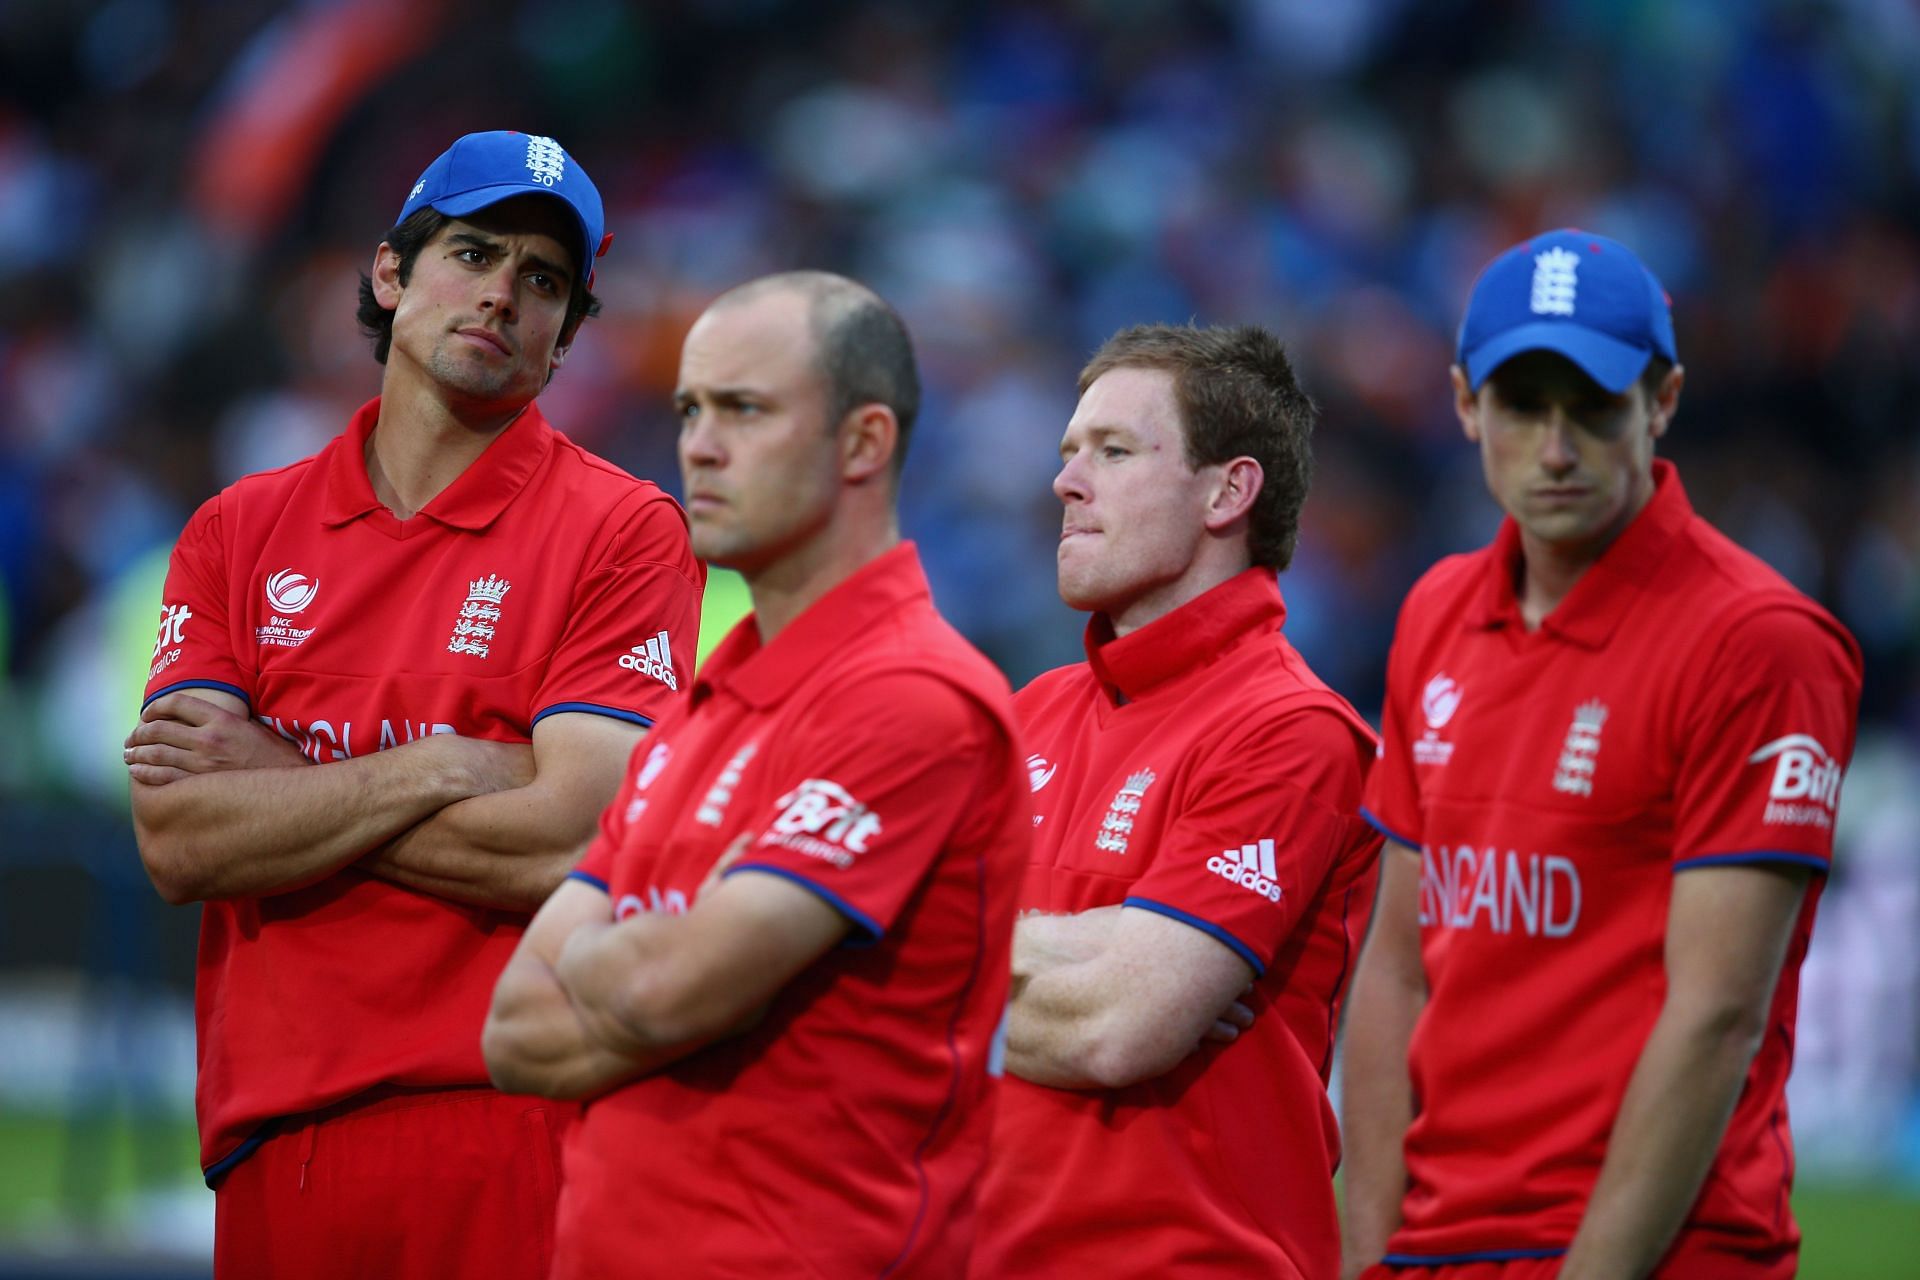 England v India: Final - ICC Champions Trophy